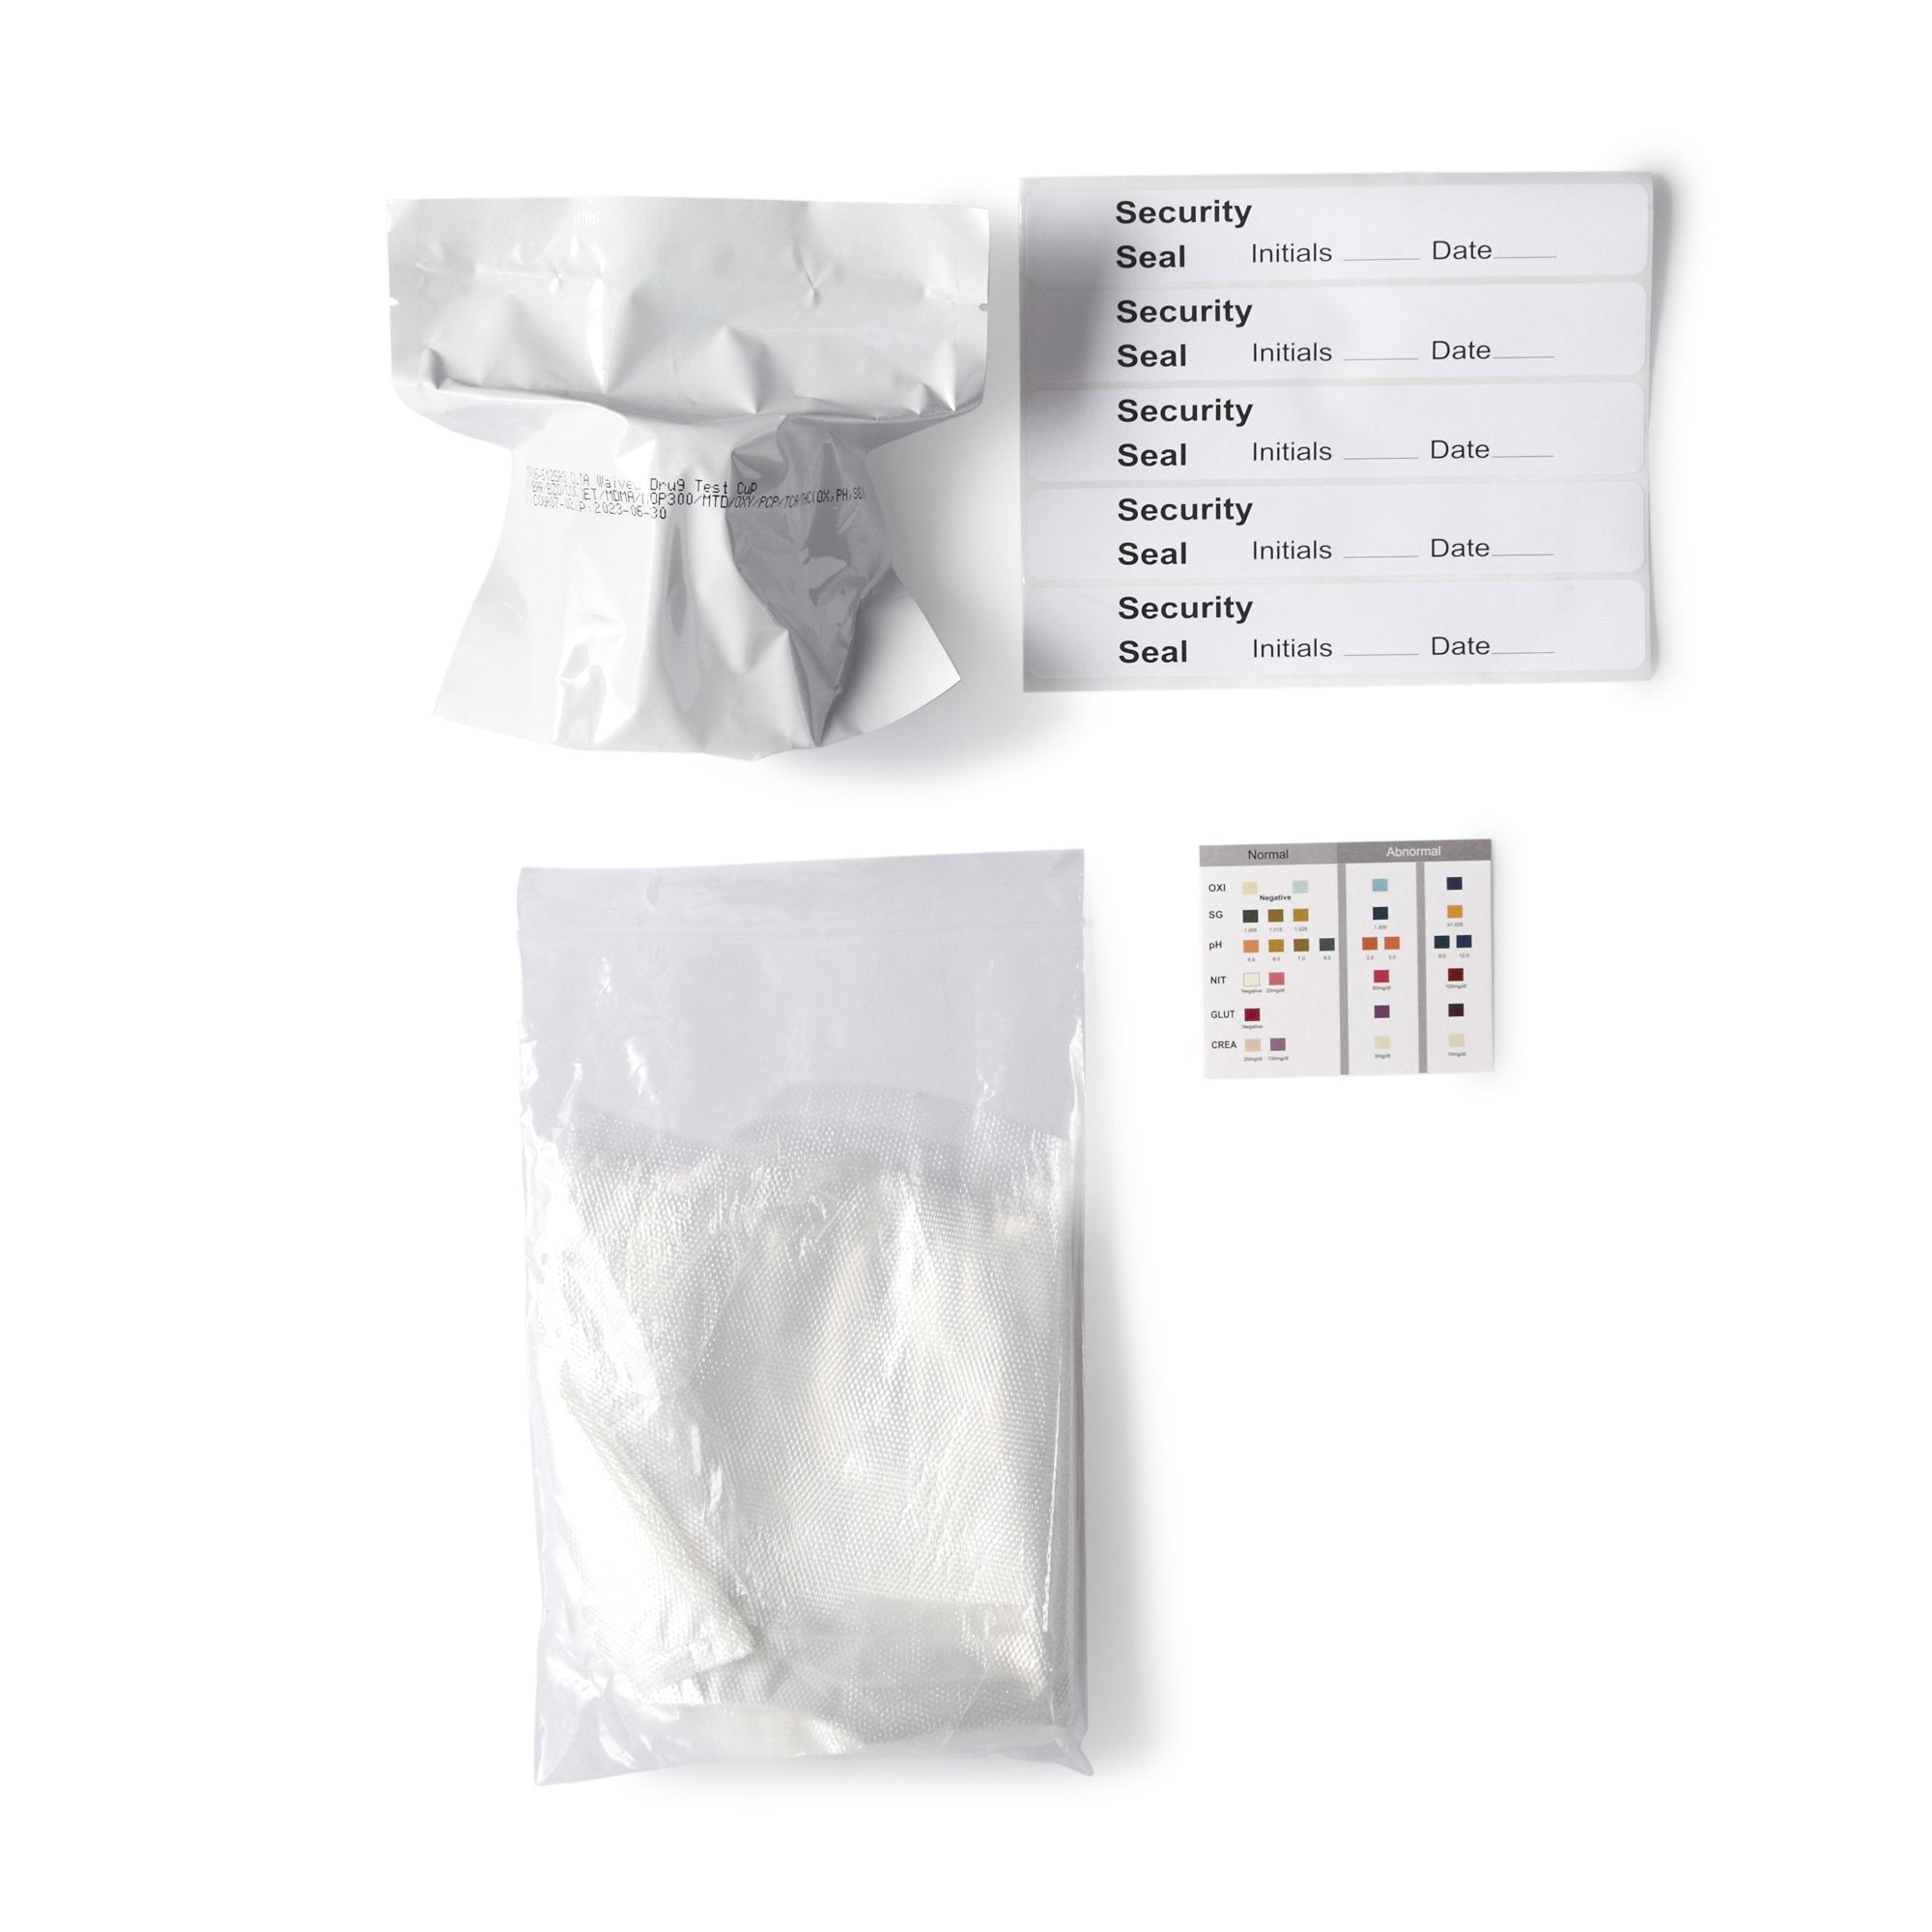 Drugs of Abuse Test Kit McKesson 12-Drug Panel with Adulterants AMP, BAR, BZO, COC, mAMP/MET, MDMA, MOP300, MTD, OXY, PCP, TCA, THC (OX, pH, SG) Urine Sample 25 Tests CLIA Waived